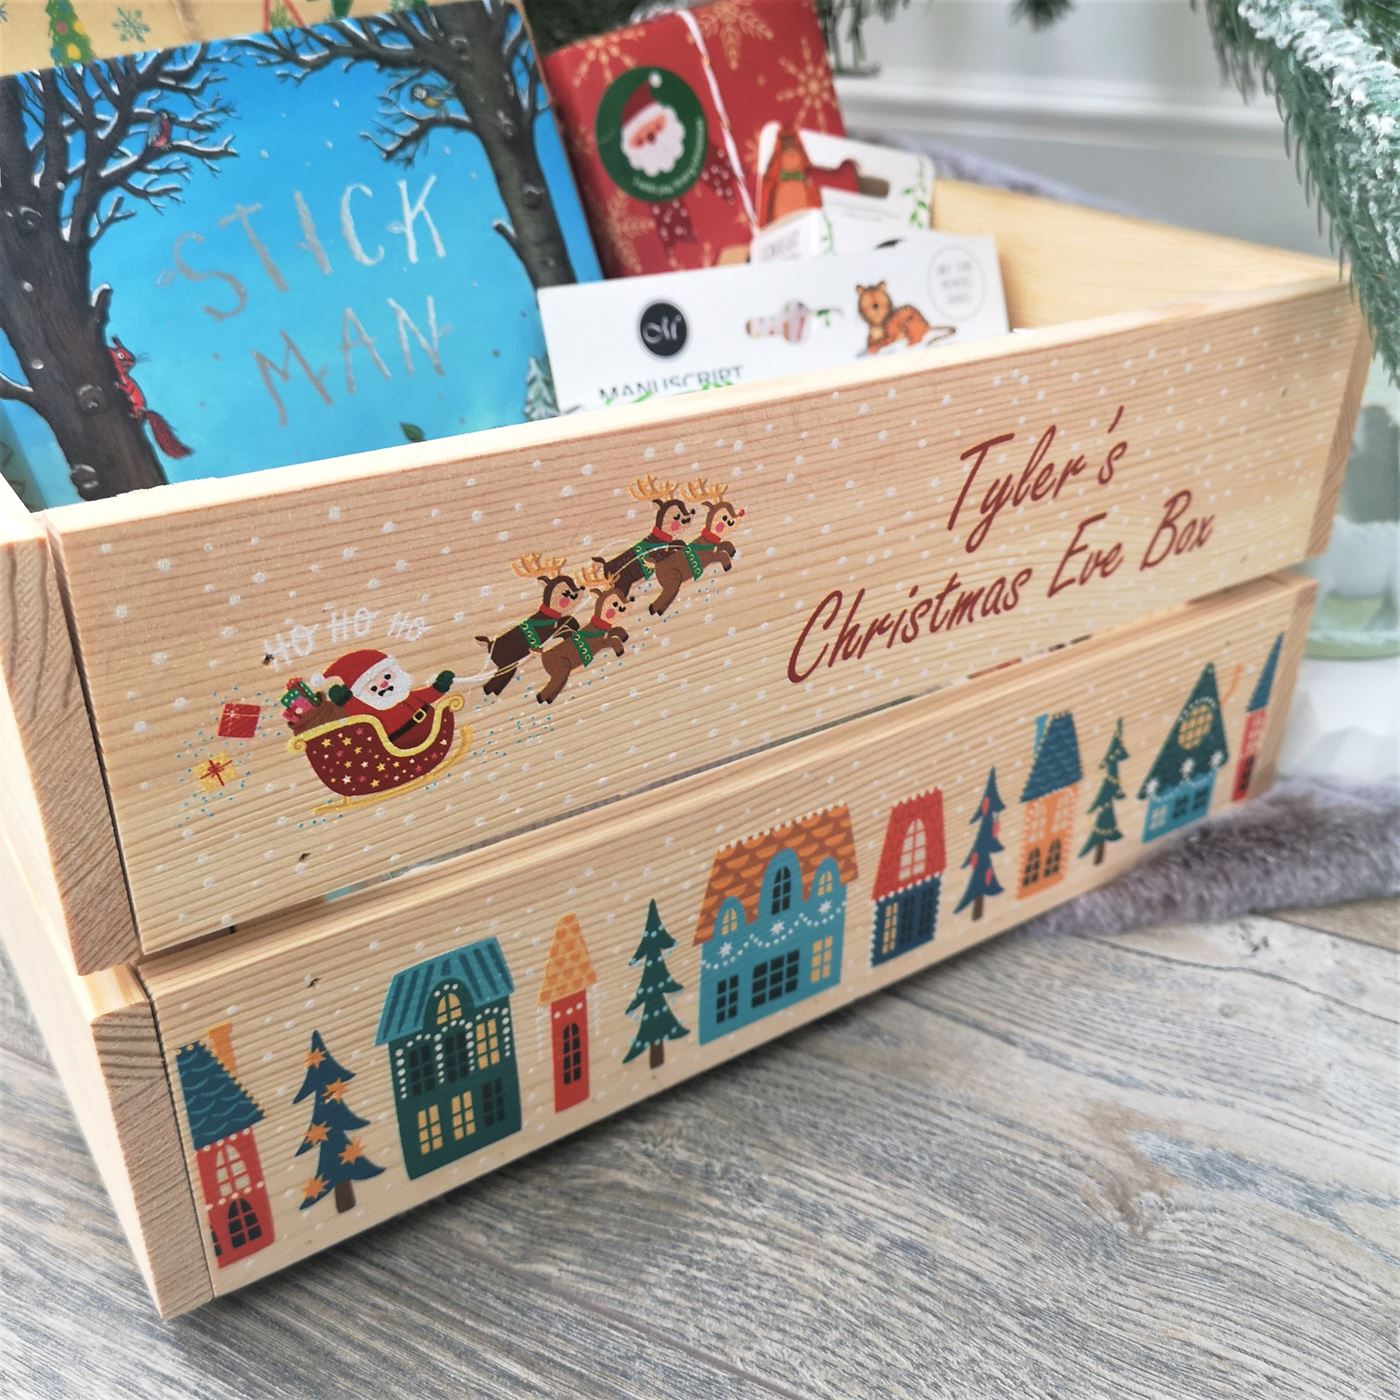 Personalised Christmas Eve Box Wooden Pine Crate - Christmas Town